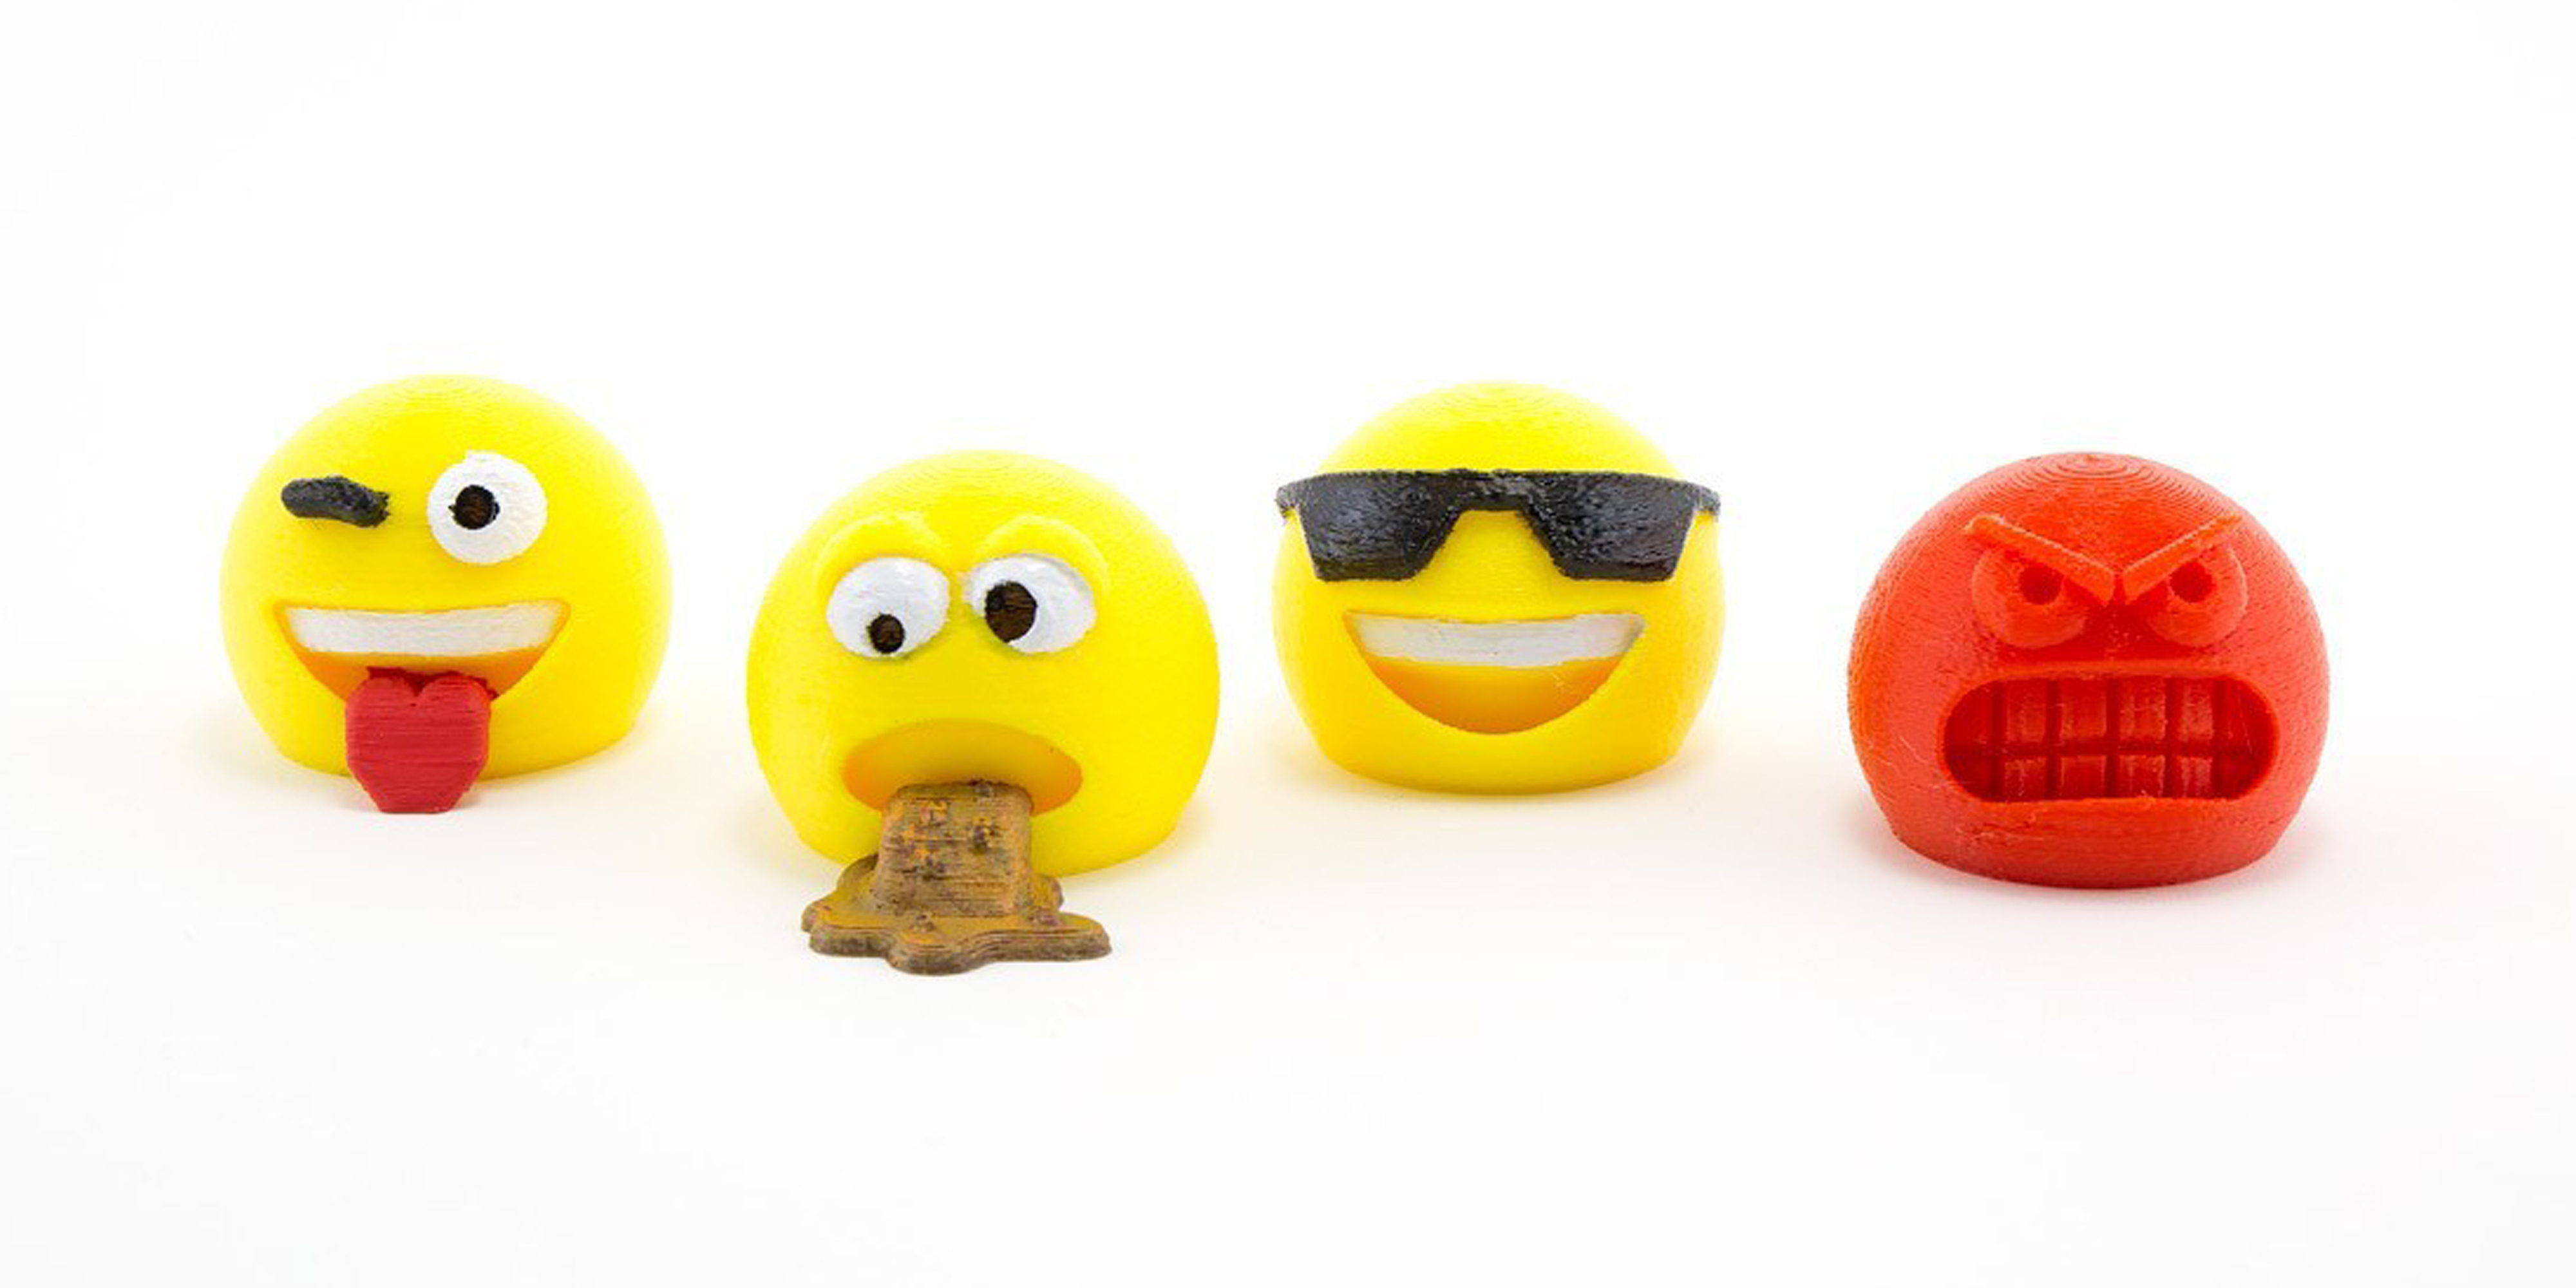 Find here a selection of the best 3D models of 3D printable files of emoji and smiley